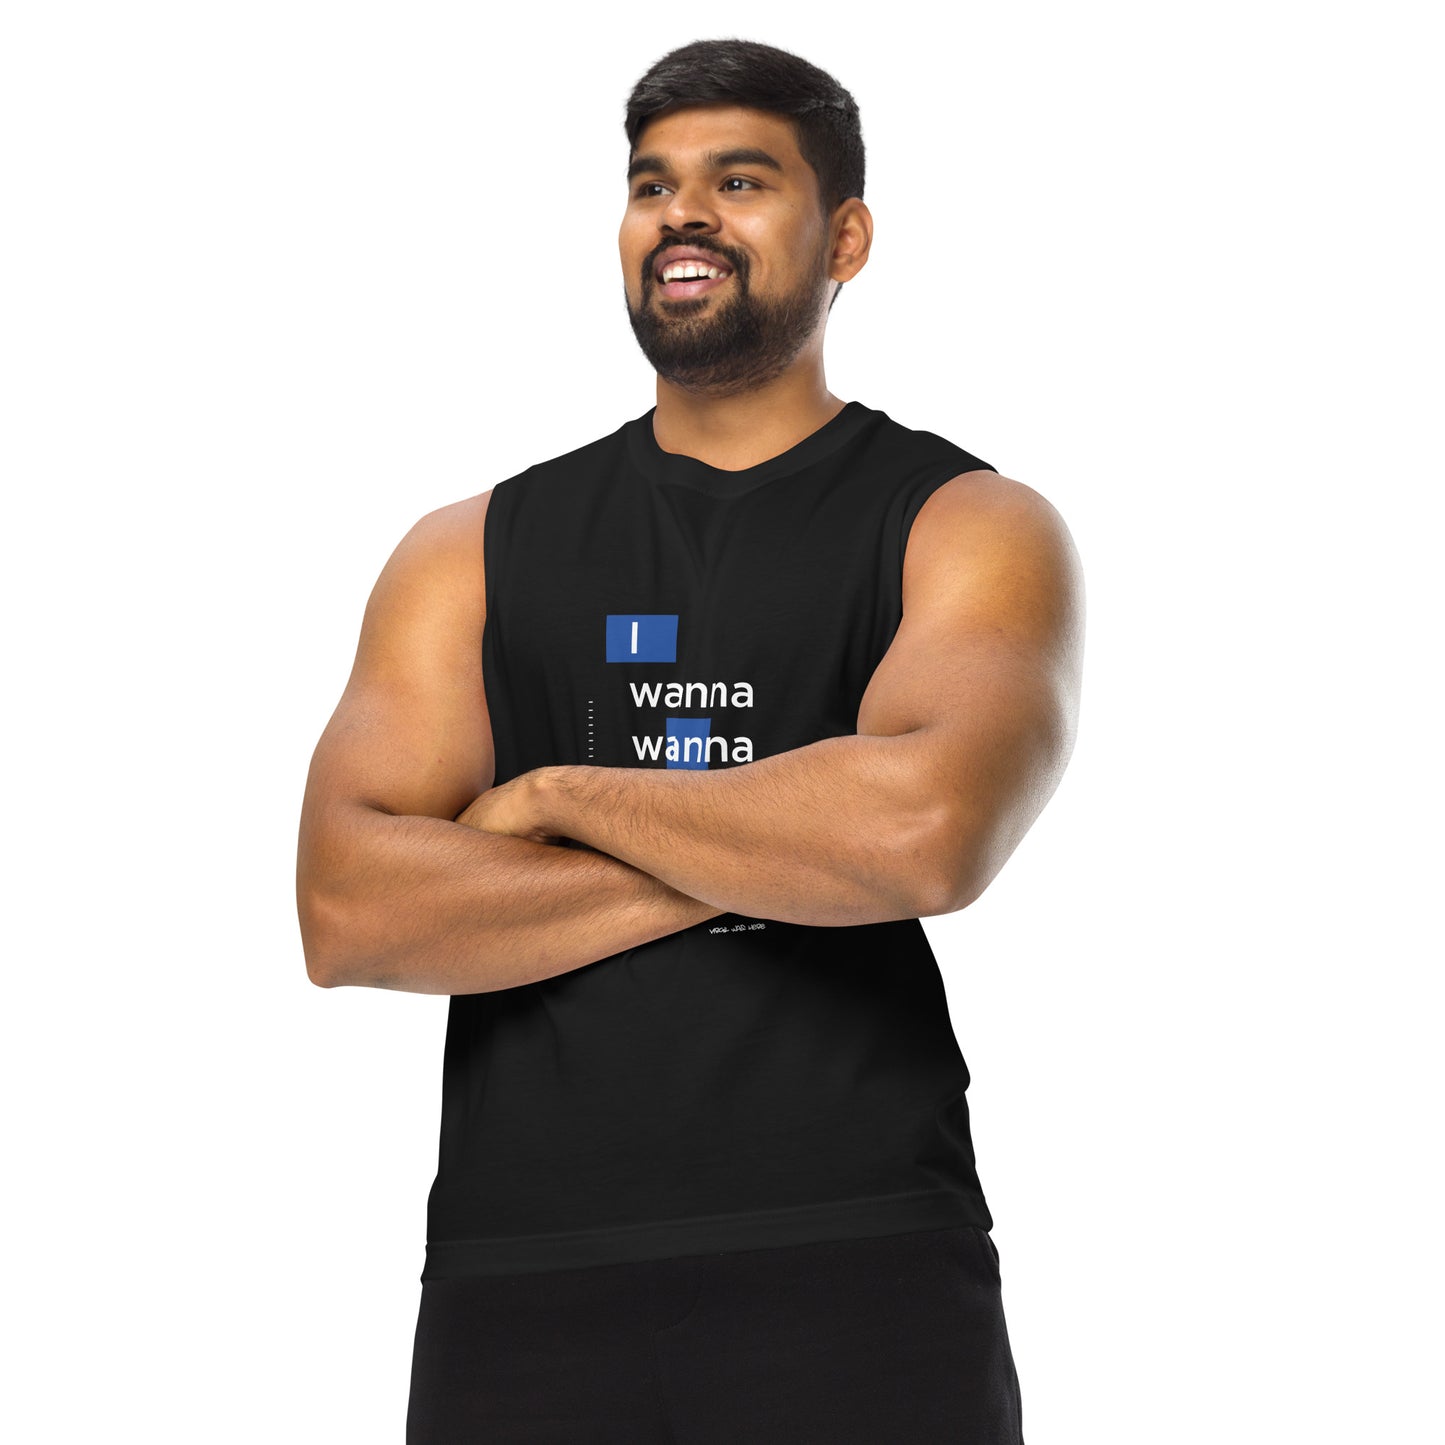 HONORABLE Muscle Shirt